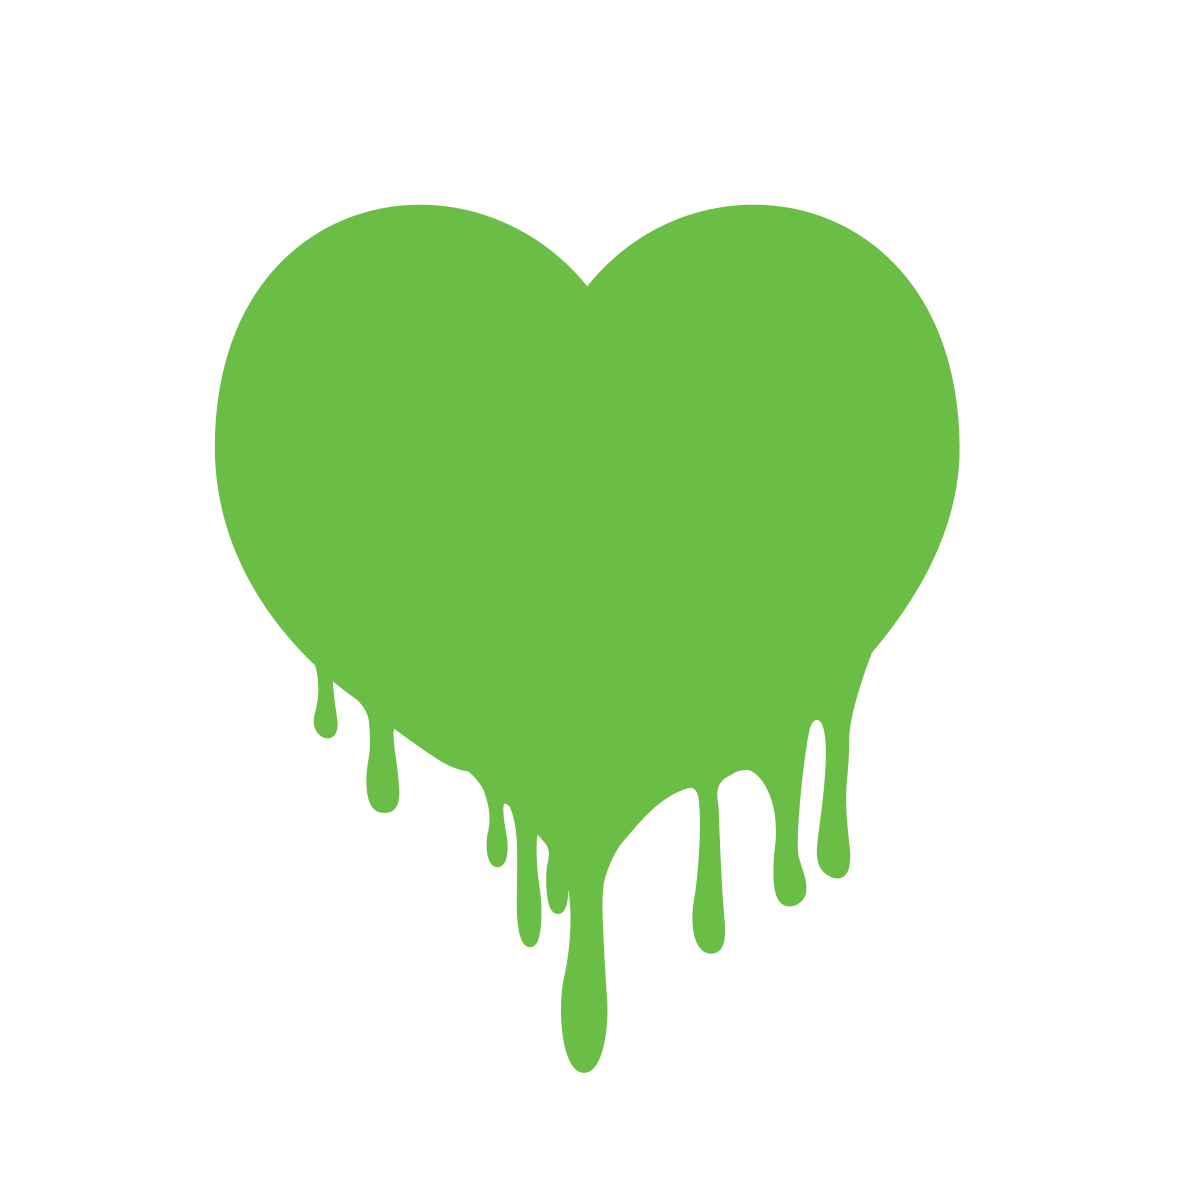 Green, dripping heart icon